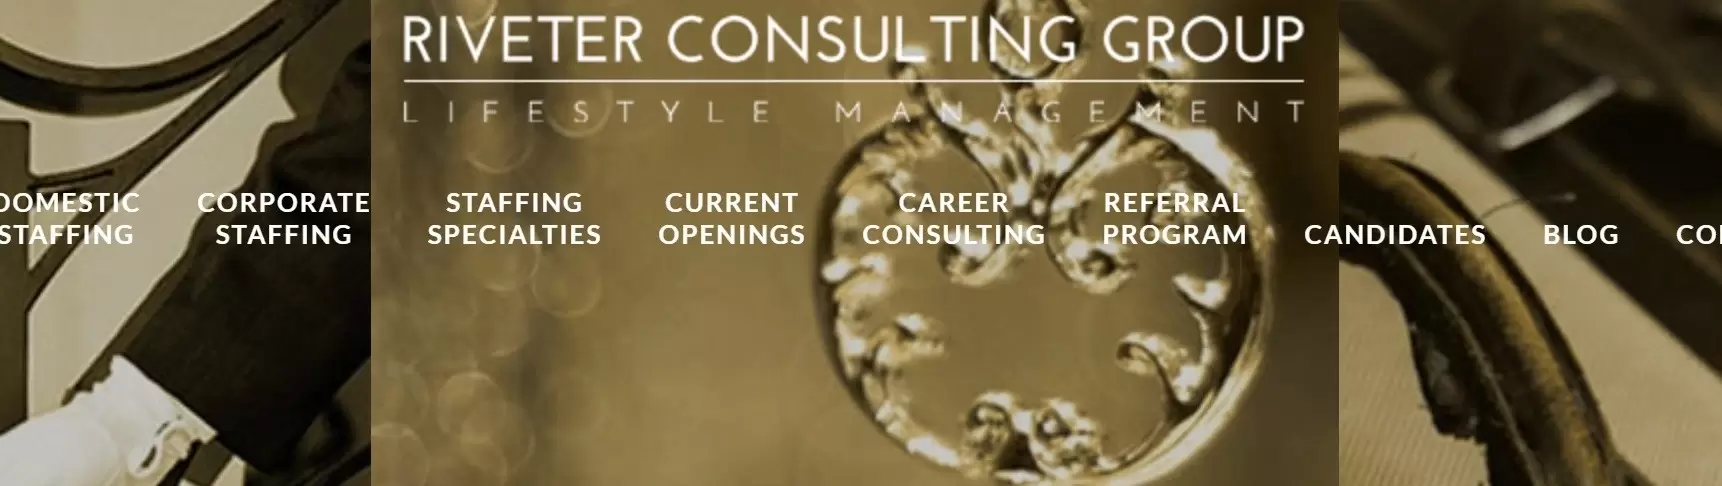 Riveter Consulting Group company profile and review